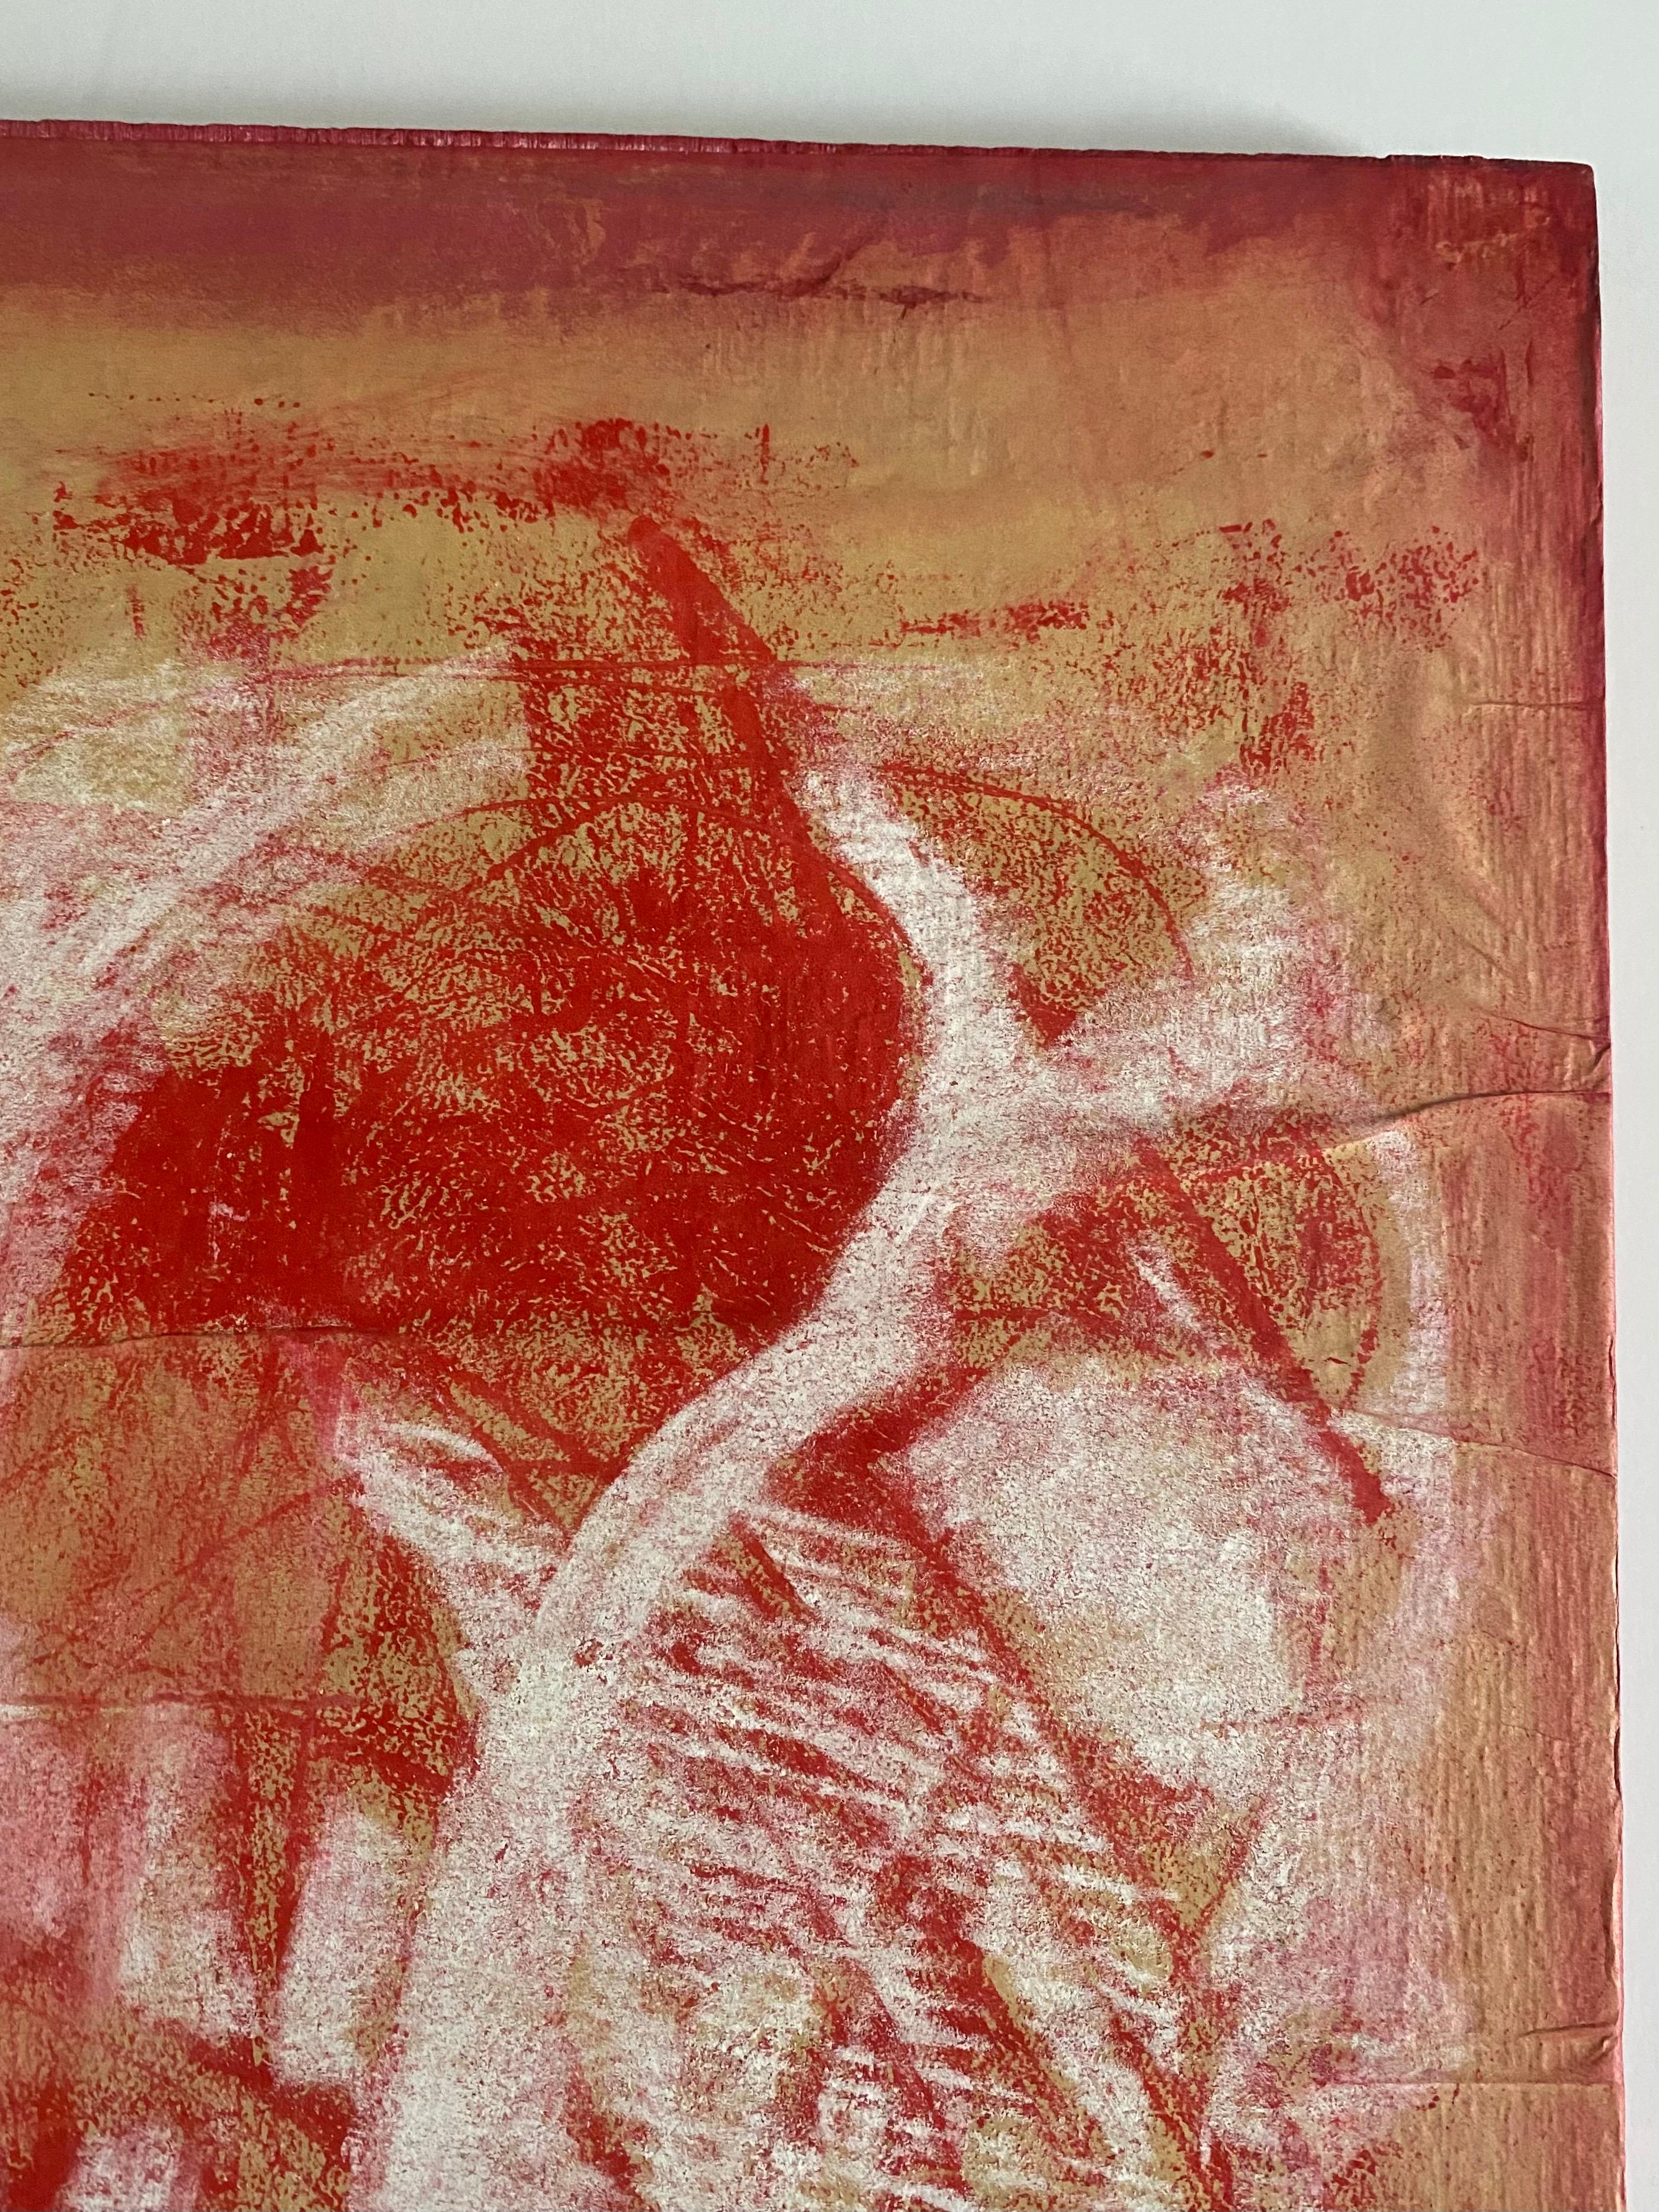 Karen Gibbings
Place, 2007
Monoprint, chalk on paper, mounted on wood 
Measures: 19 x 17 in
48.26 × 43.18 cm
Signed by artist on verso.

Karen Gibbons is an artist based in New York. Her work has been featured in numerous exhibitions at key